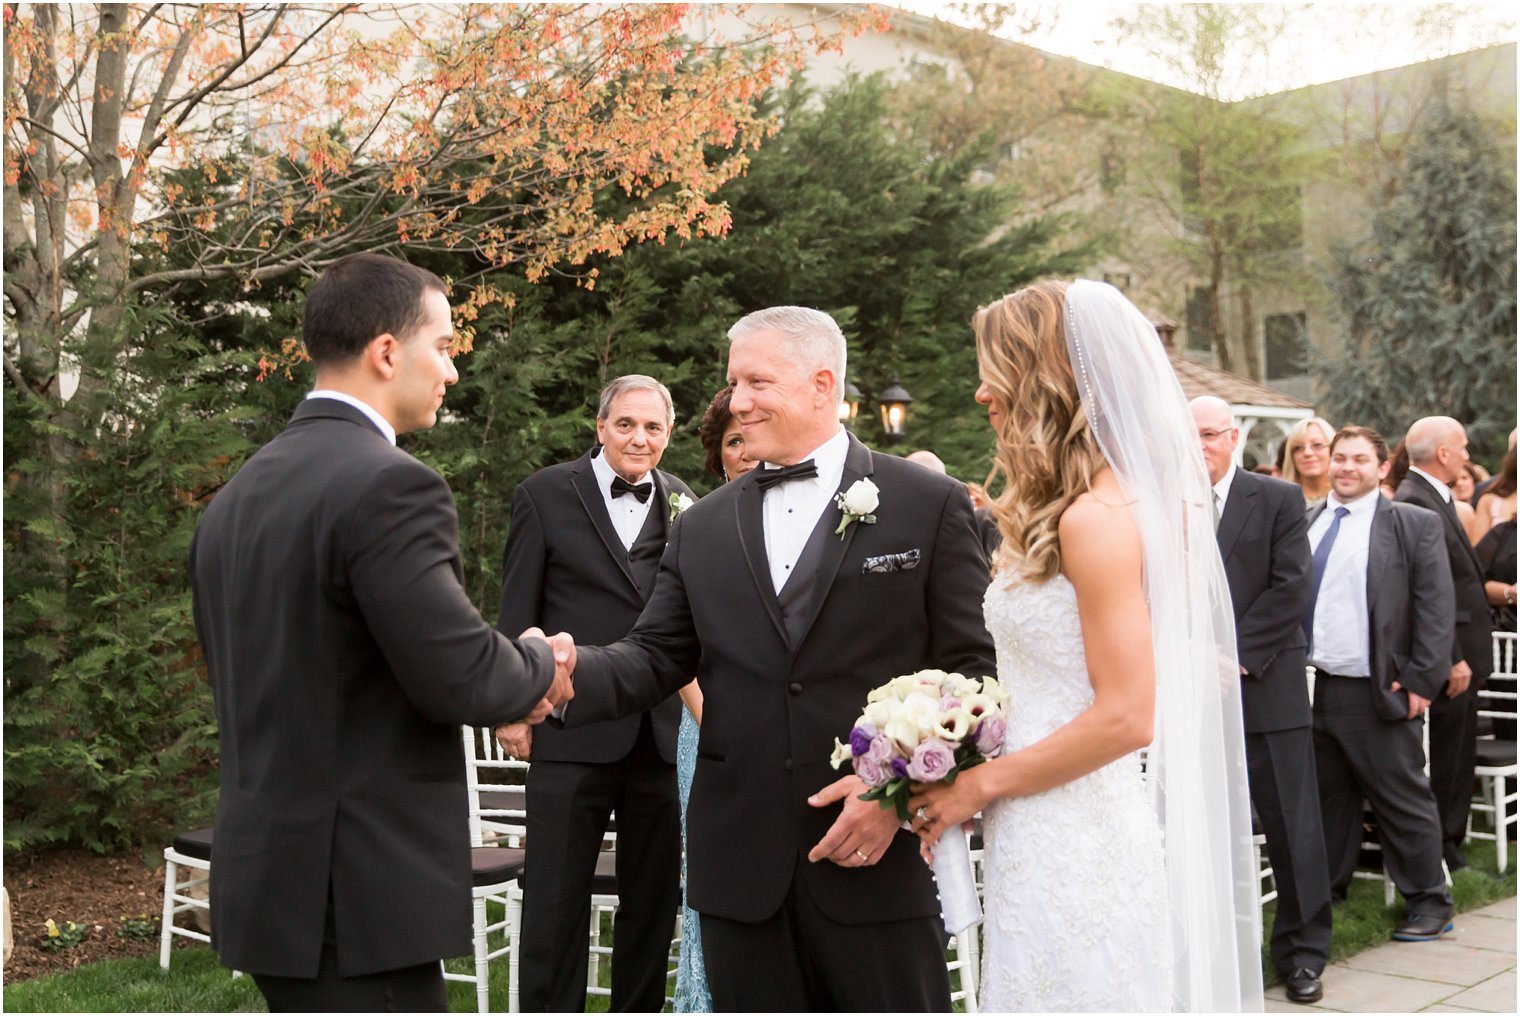 Father of the bride giving away his daughter | Photos by Idalia Photography